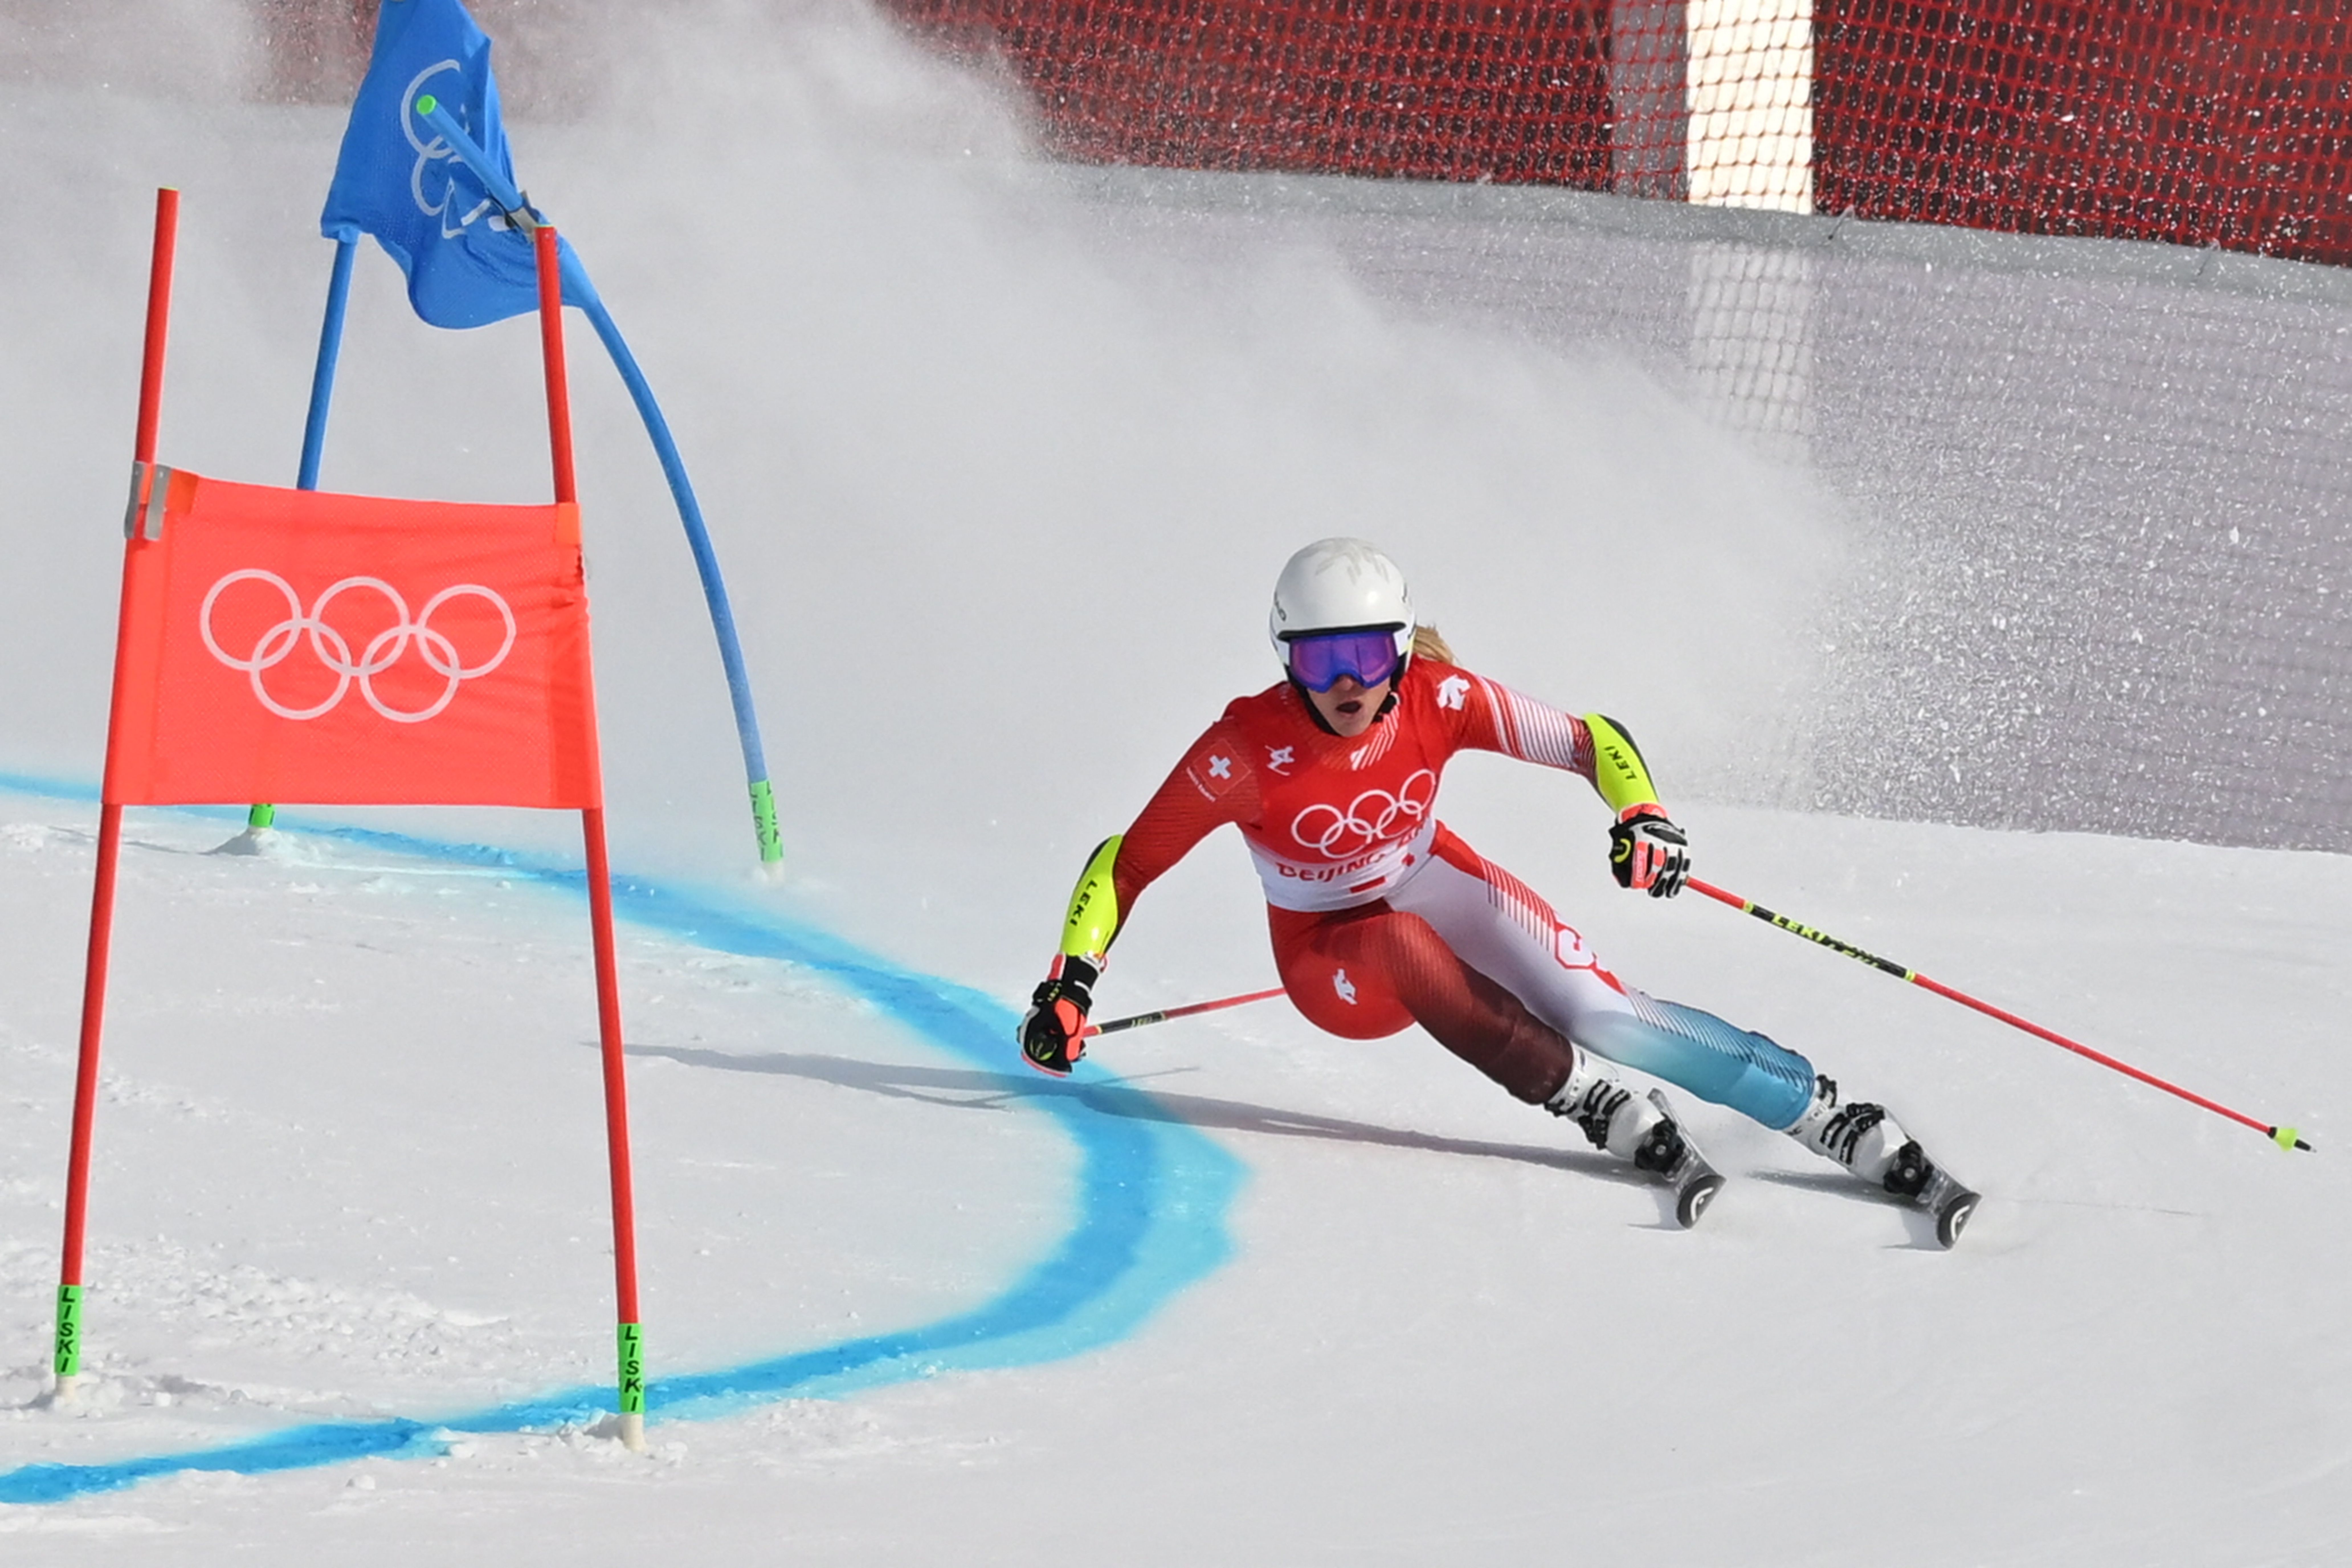 Switzerland's Lara Gut competes in the second run of the women's giant slalom during the Beijing 2022 Winter Olympic Games at the Yanqing National Alpine Skiing Centre in Yanqing on February 7